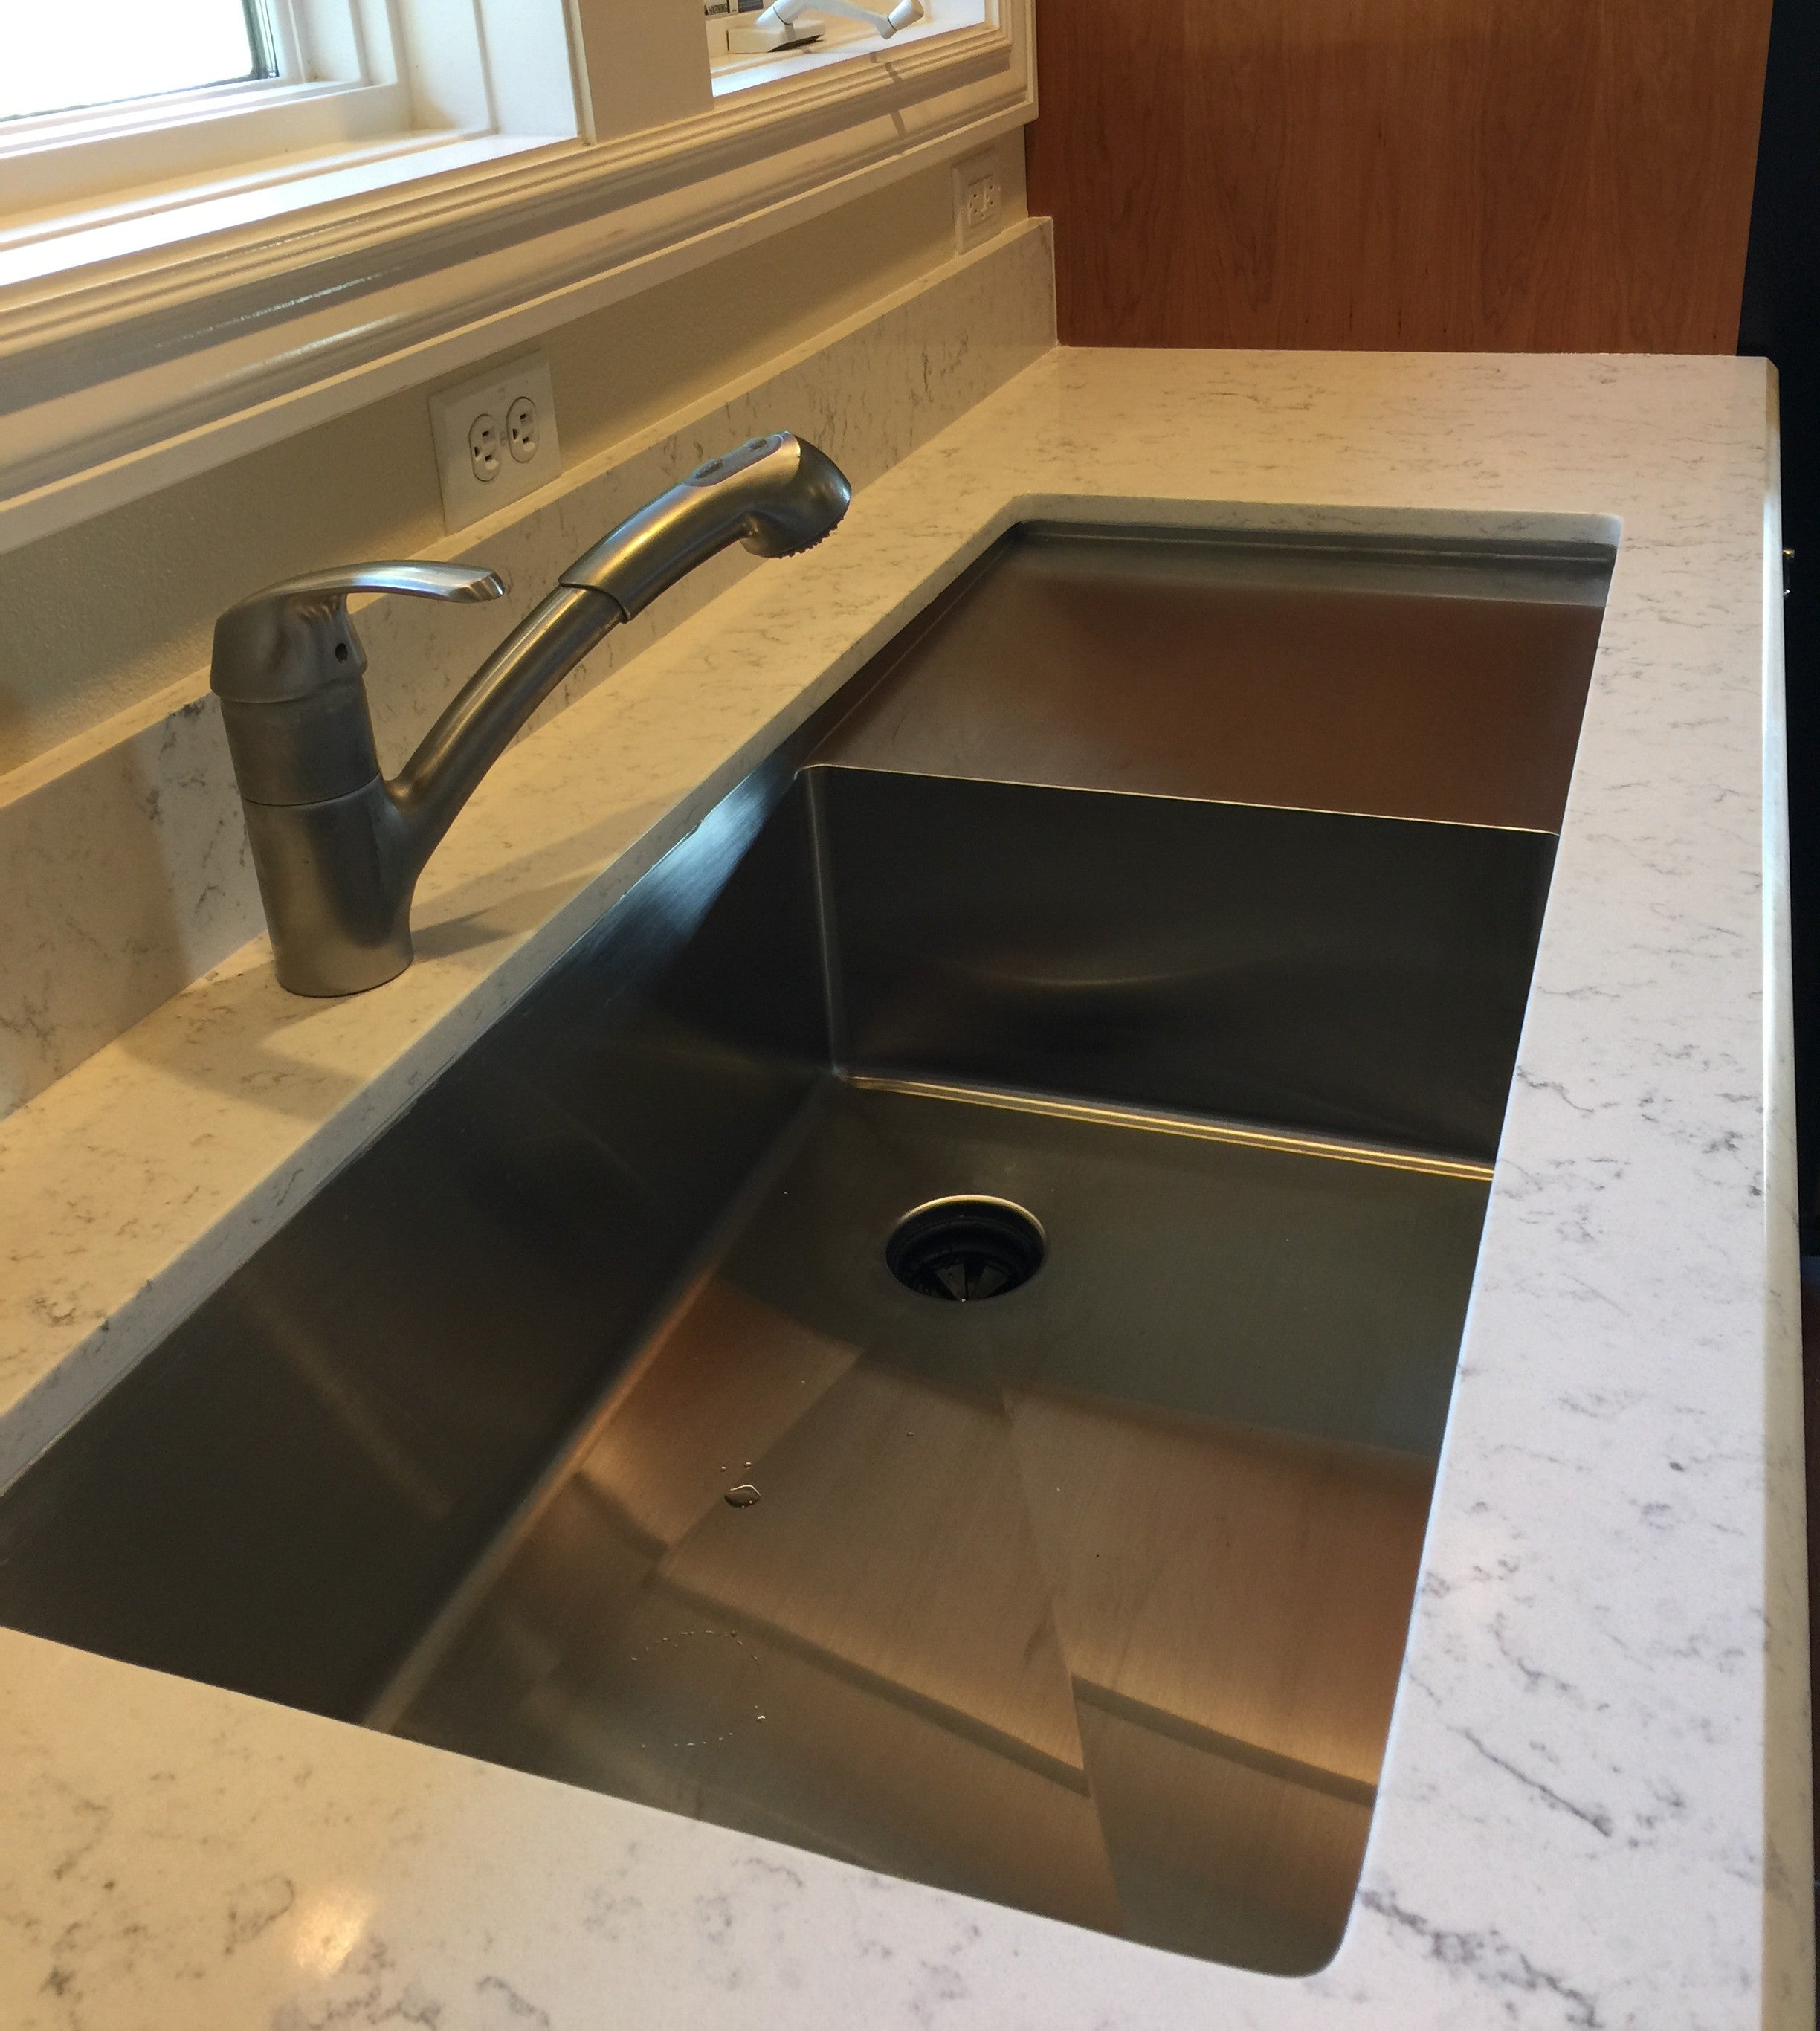 Stainless Steel Drainboard Kitchen Sink With Offset Drain Right 5PS50R ?10451963907140238388